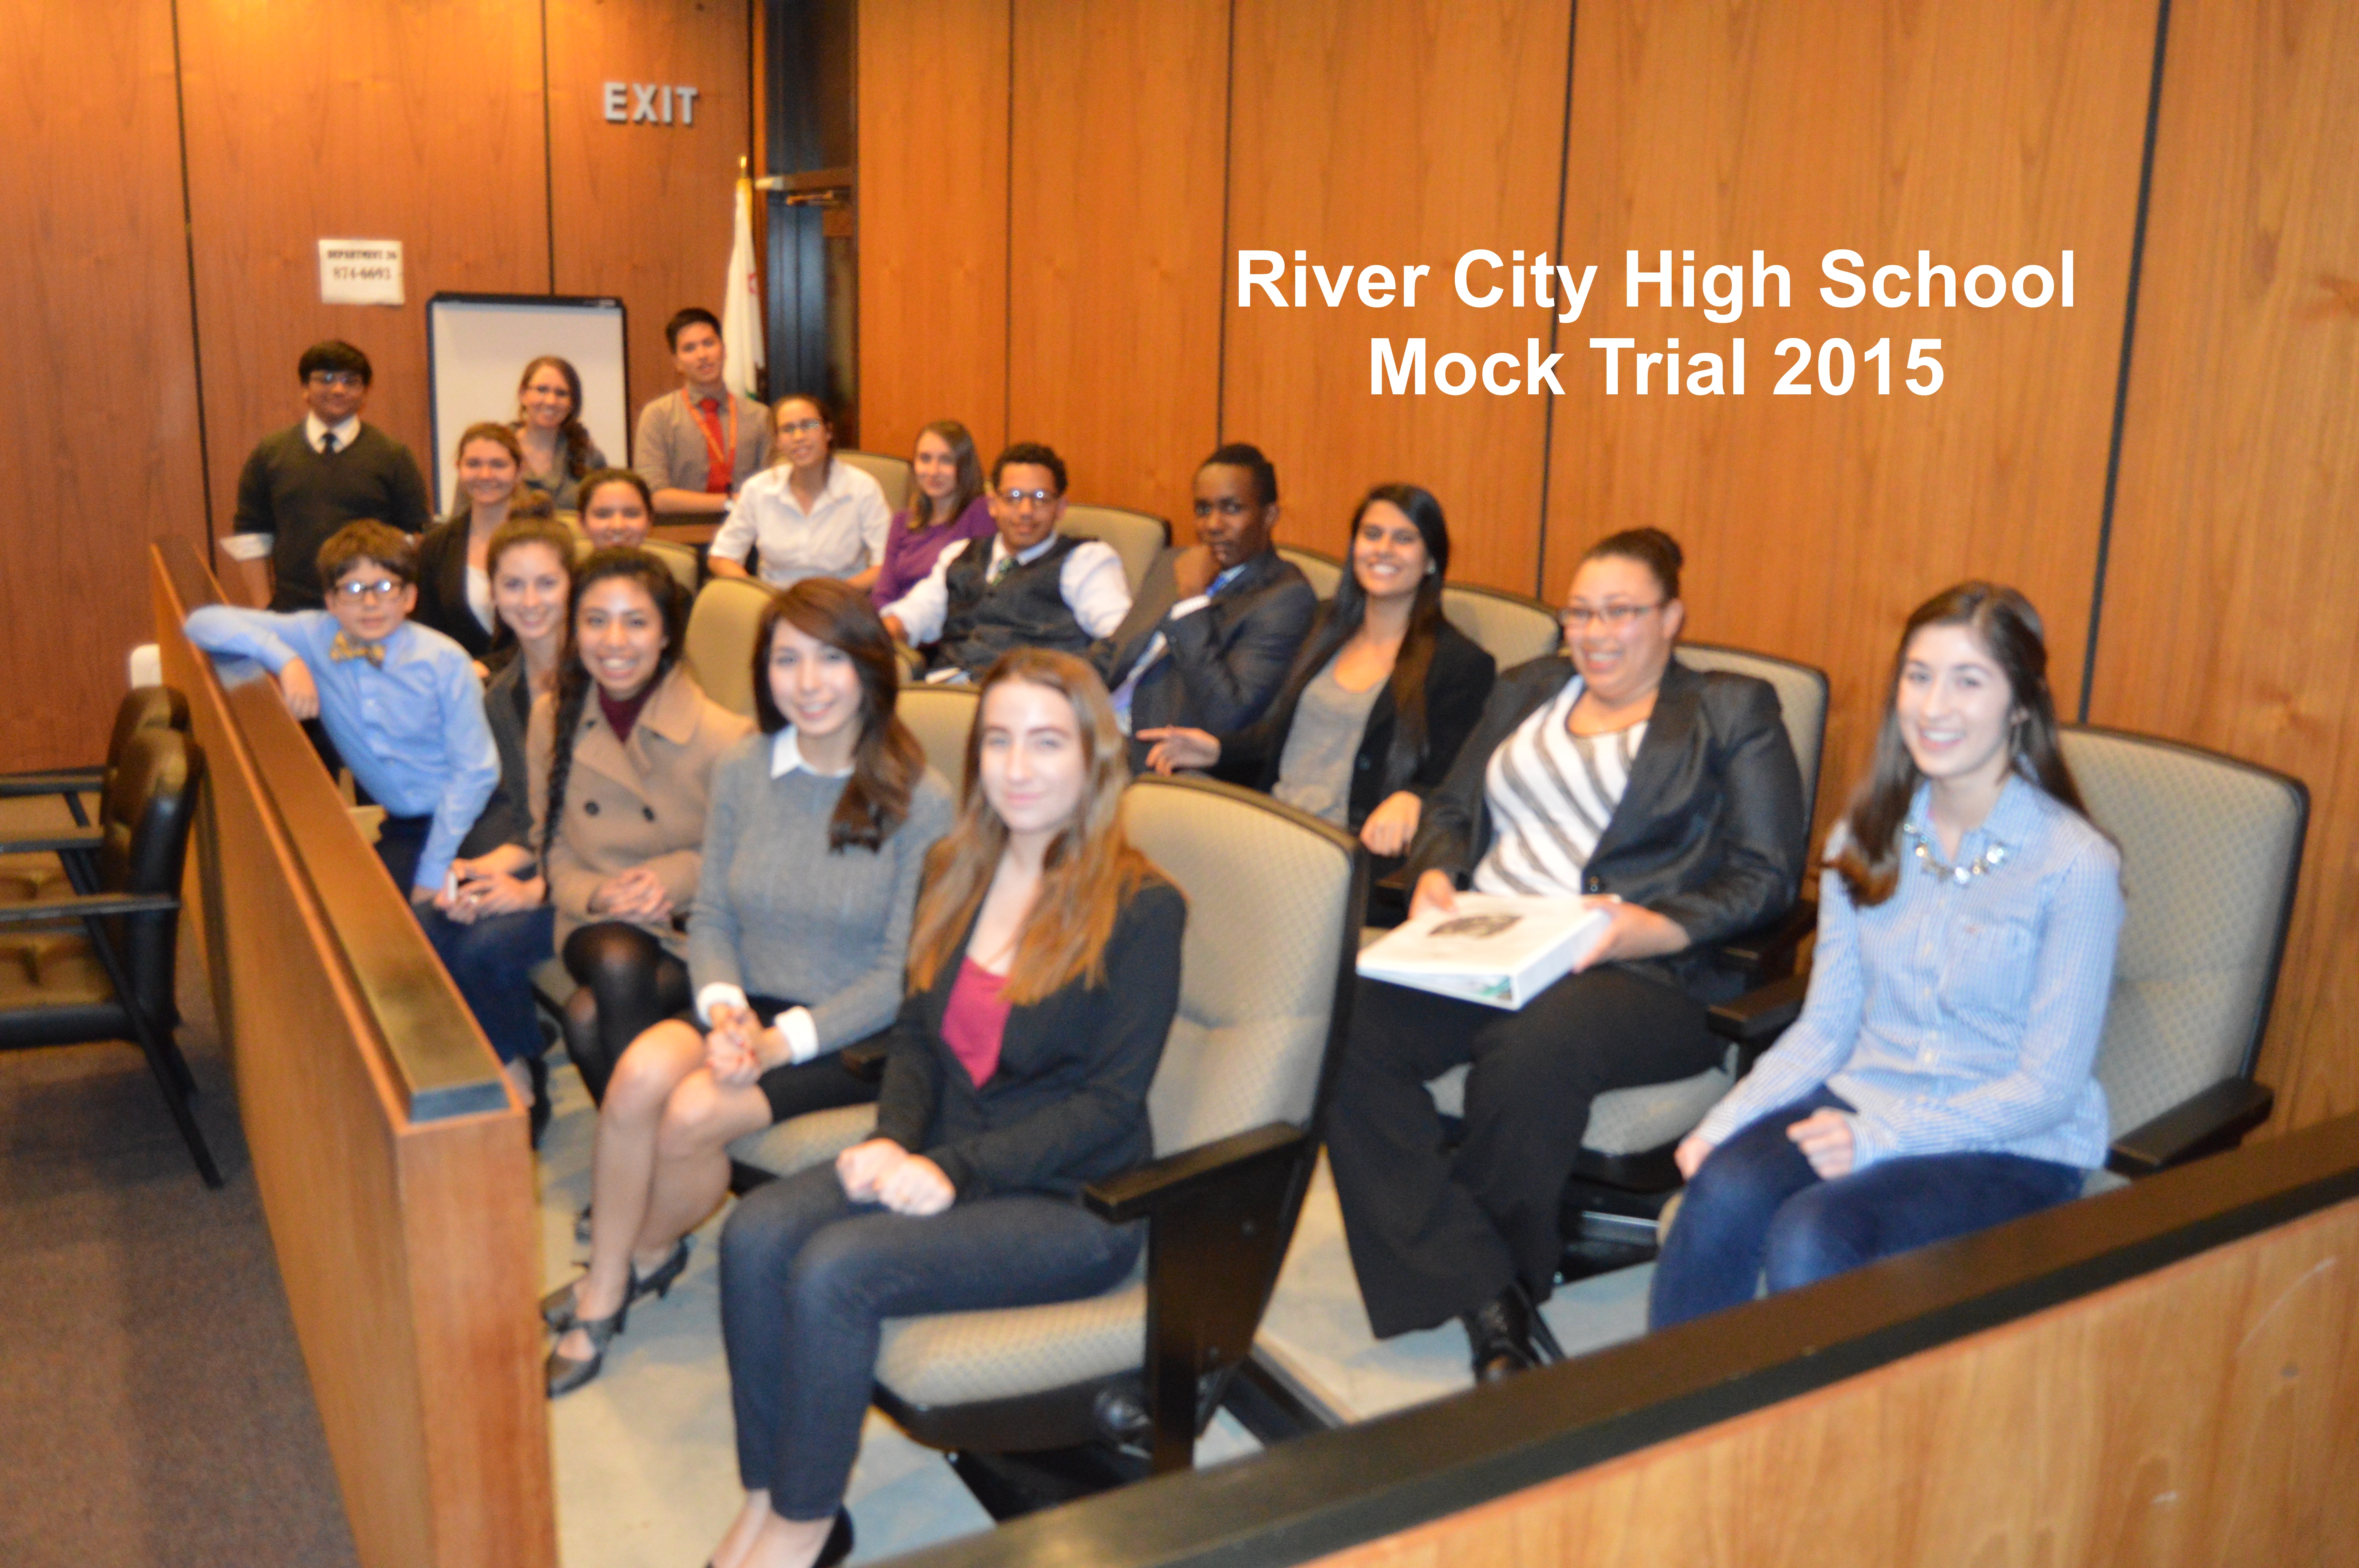 2015 RCHS Mock Trial group photo